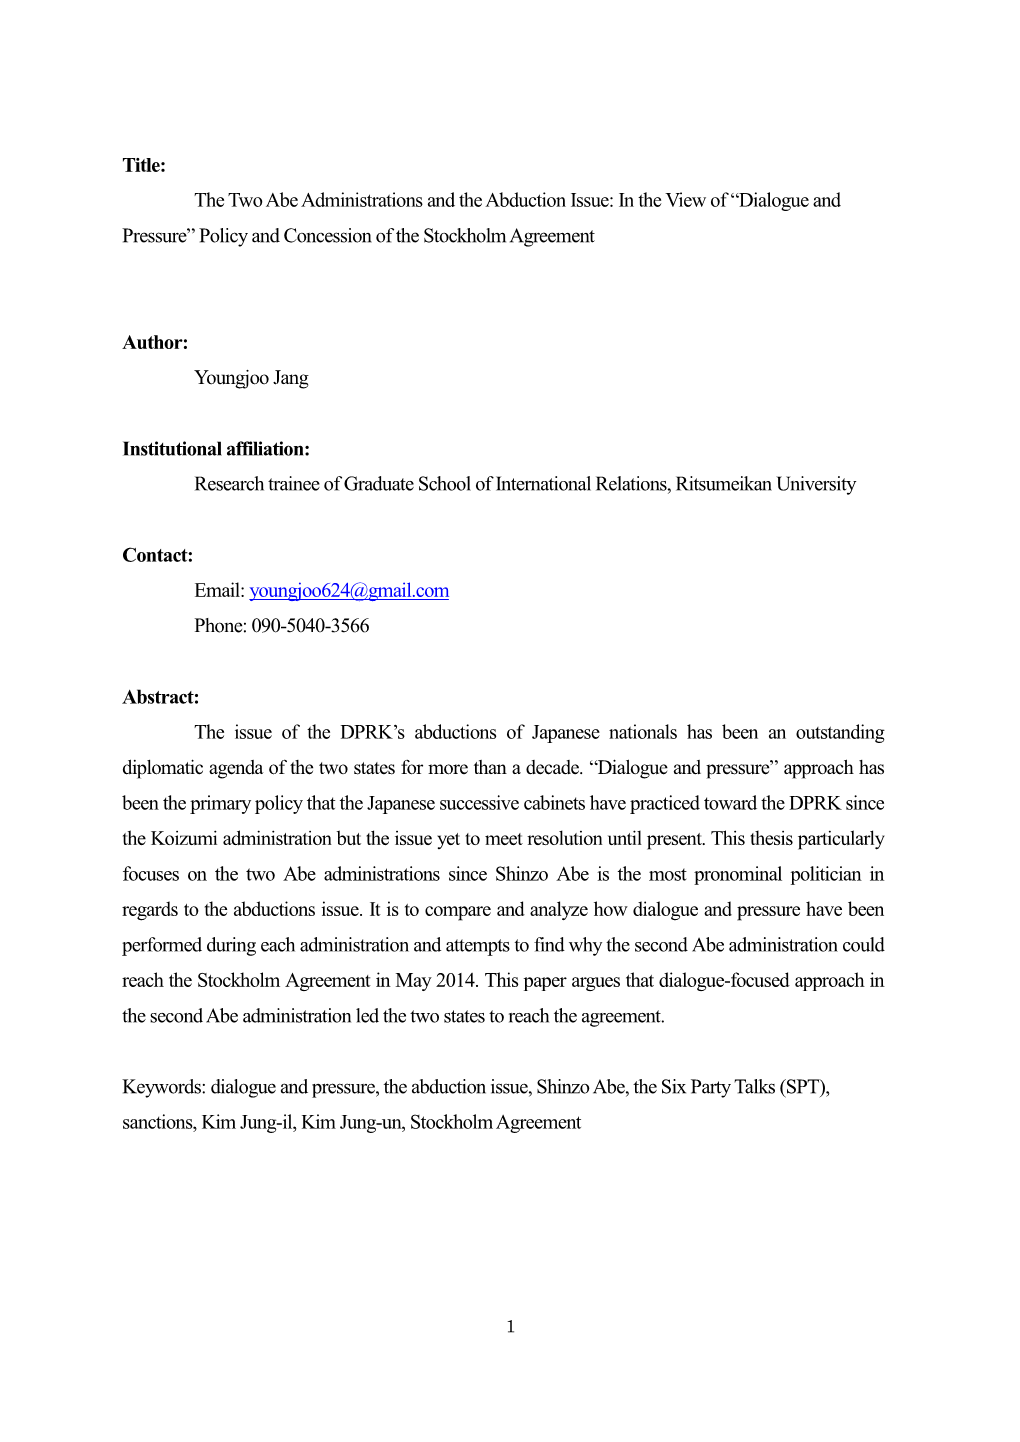 Title: the Two Abe Administrations and the Abduction Issue: in the View of “Dialogue and Pressure” Policy and Concession of the Stockholm Agreement